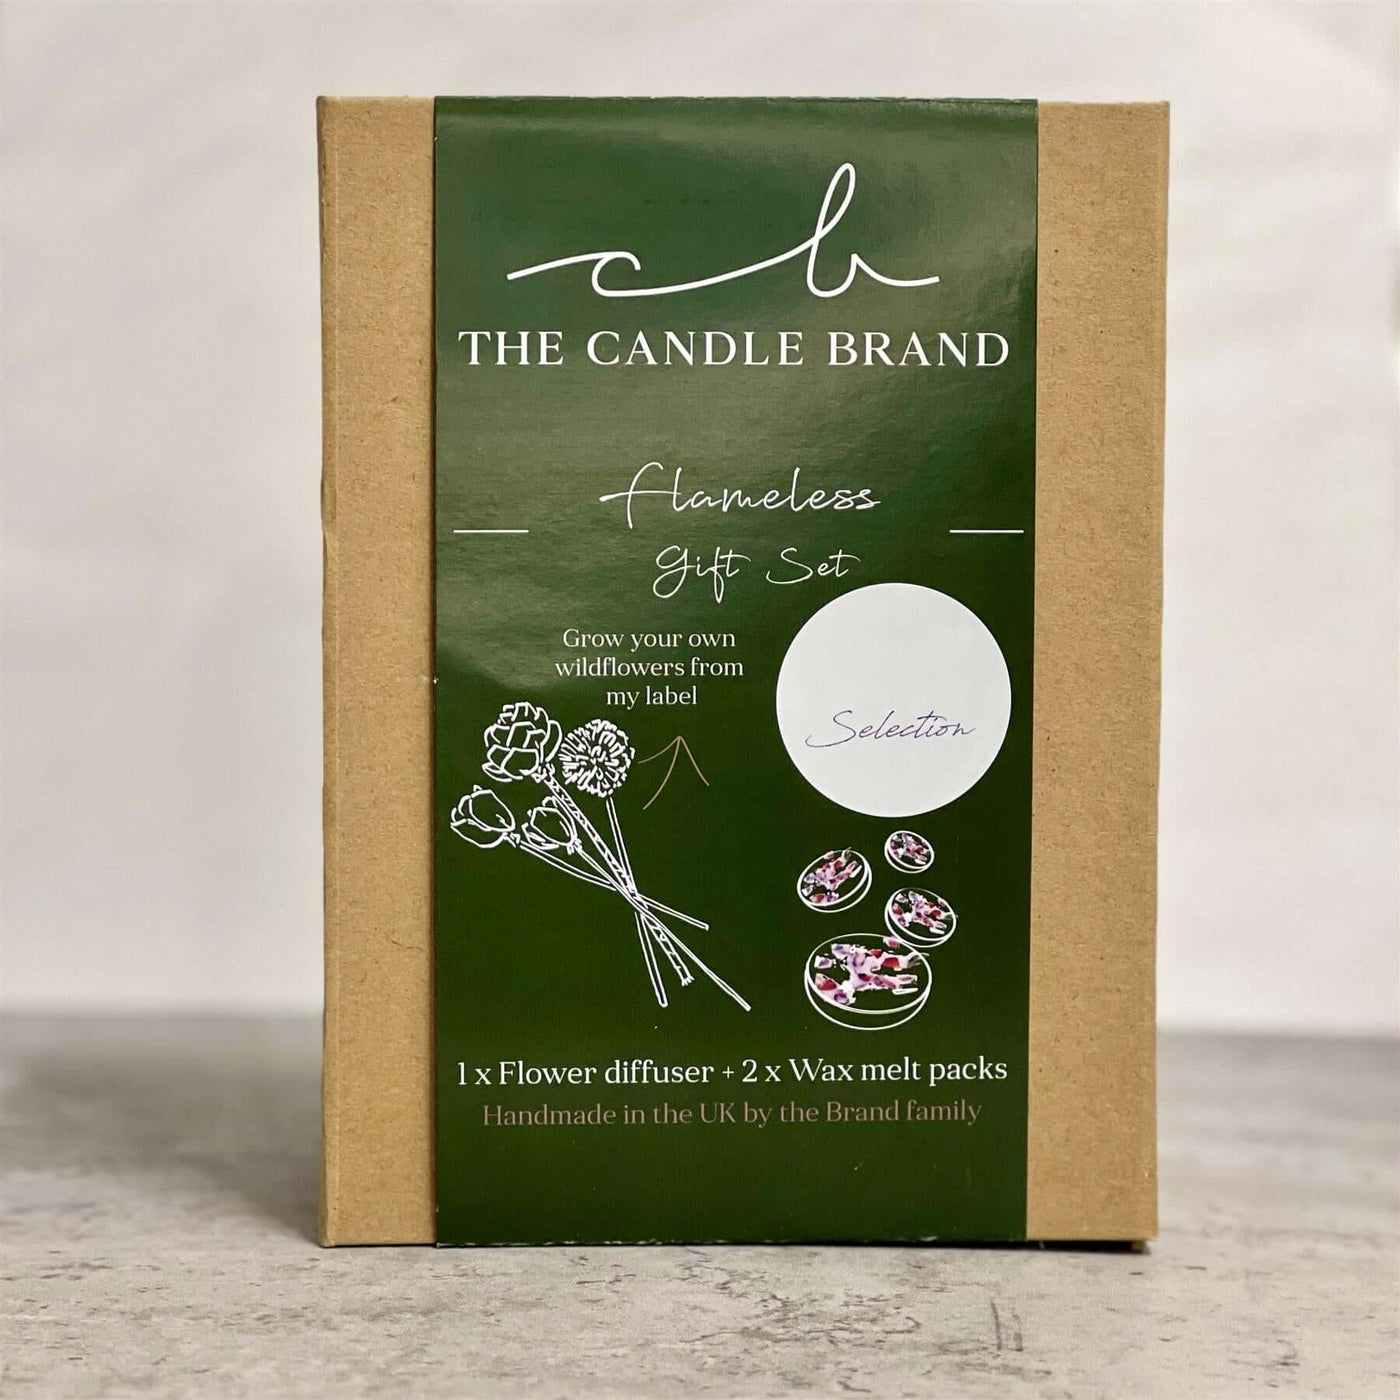 Eco-Friendly Flameless Gift Set - Best Seller The Candle Brand Home Fragrance